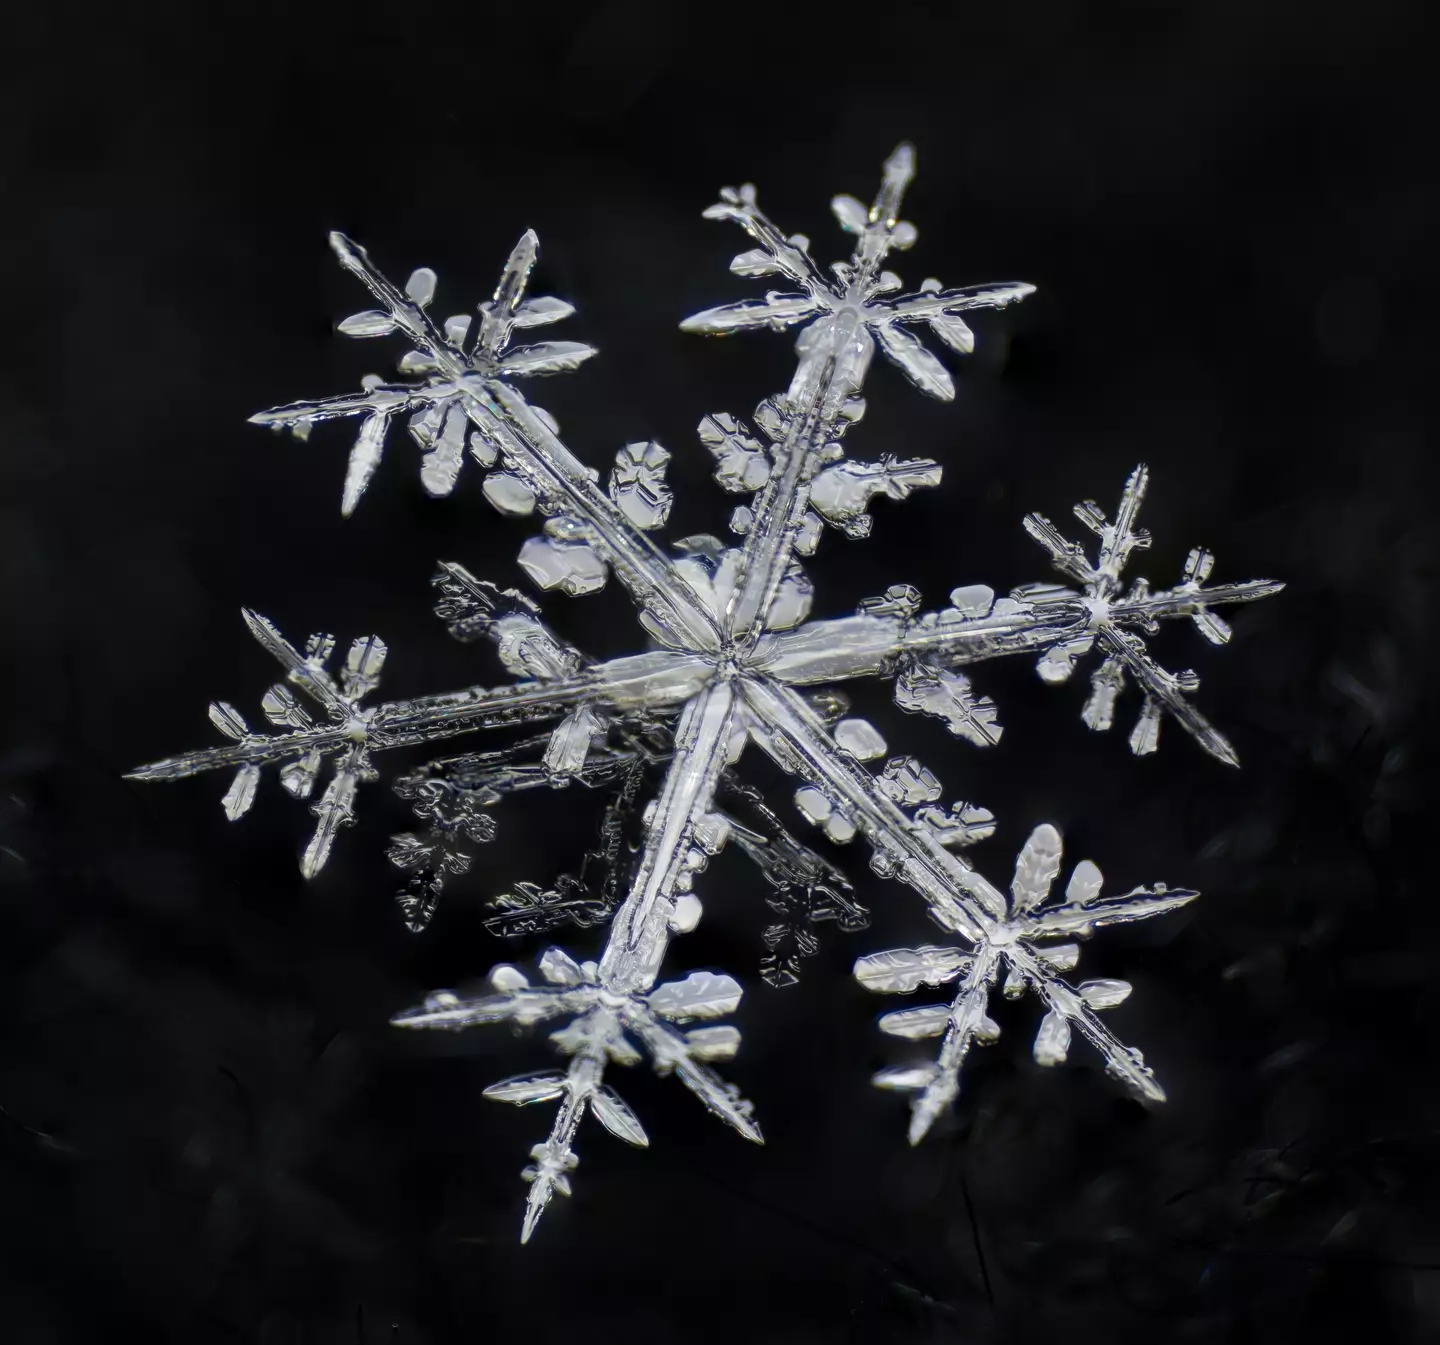 The actual proportions of the biggest snowflake are quite impressive.